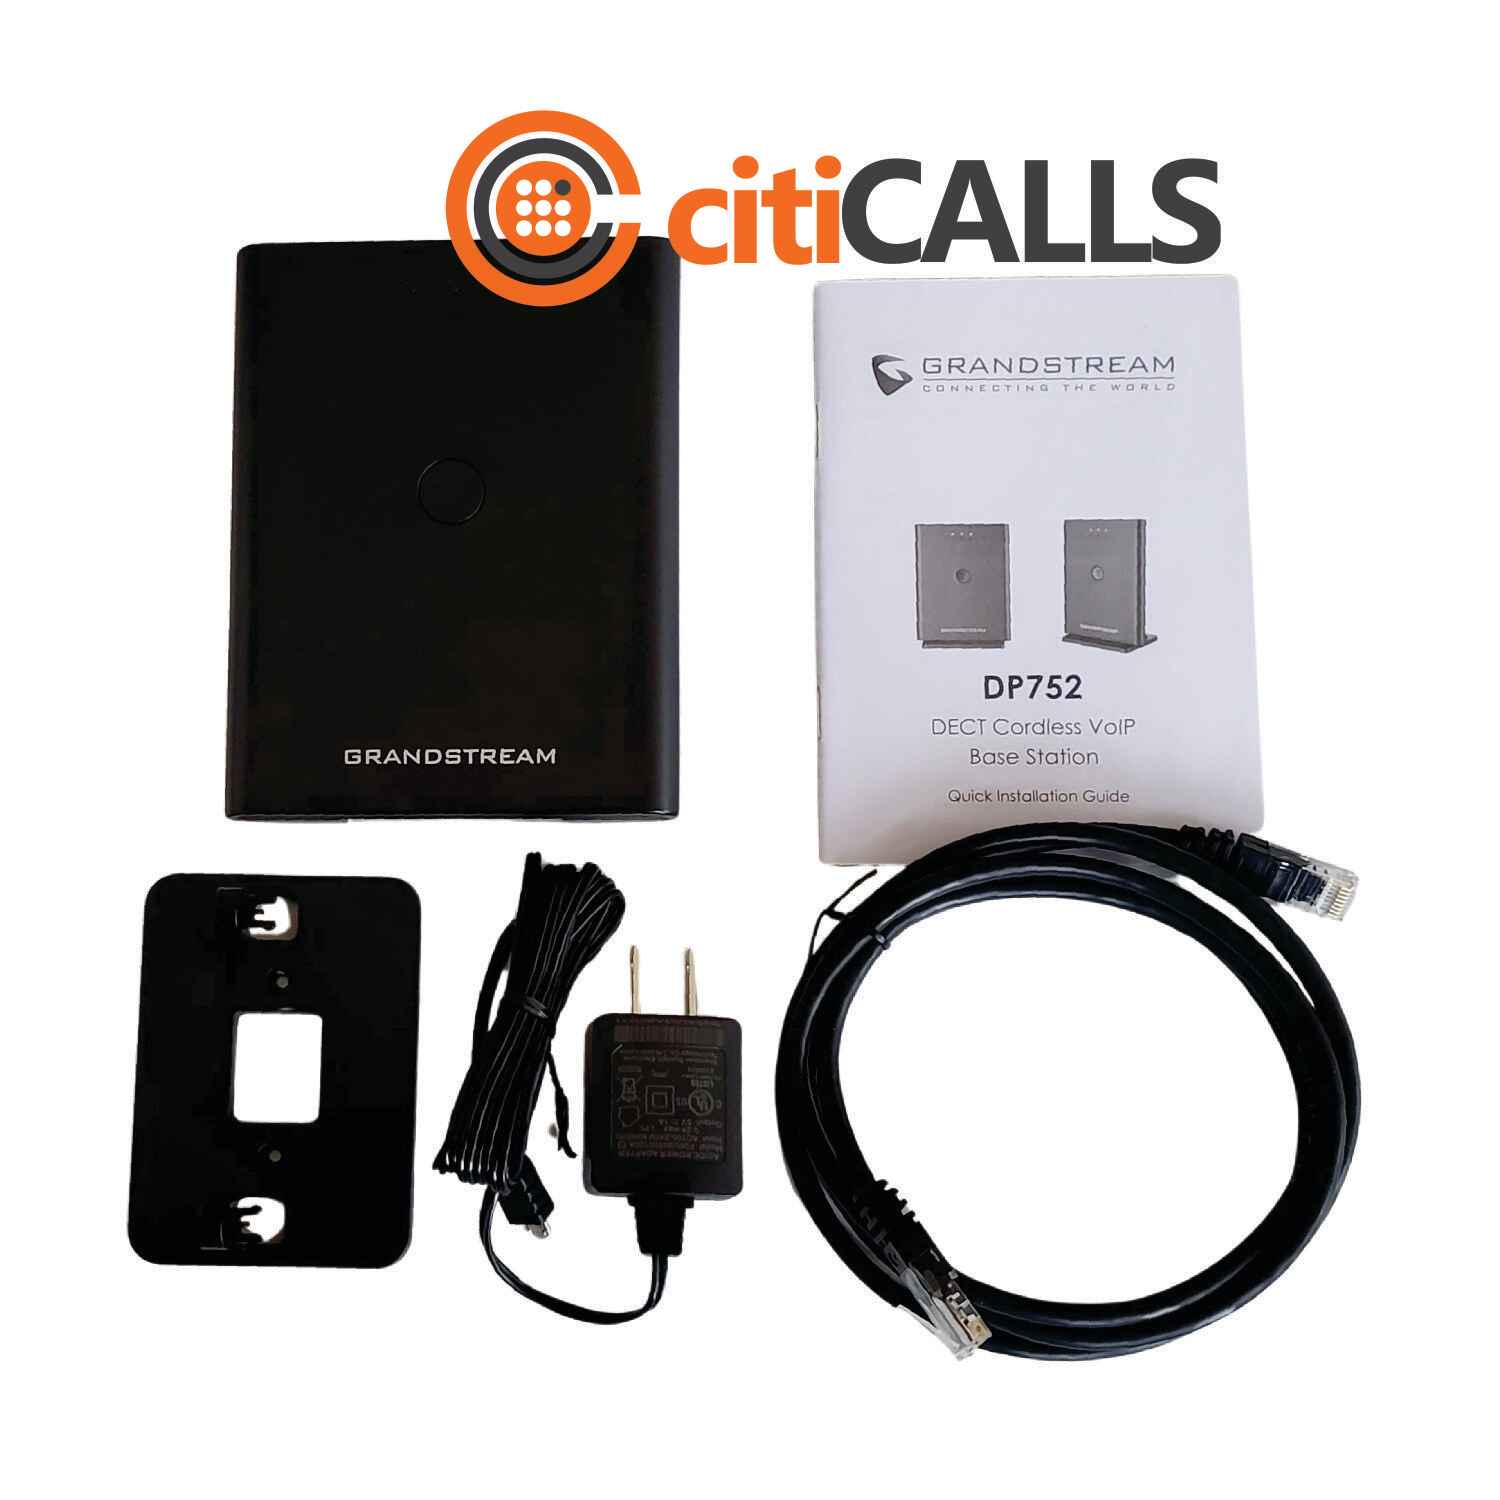 Grandstream GS-DP752 Powerful DECT VoIP Base Station For DP7xx Cordless Handsets